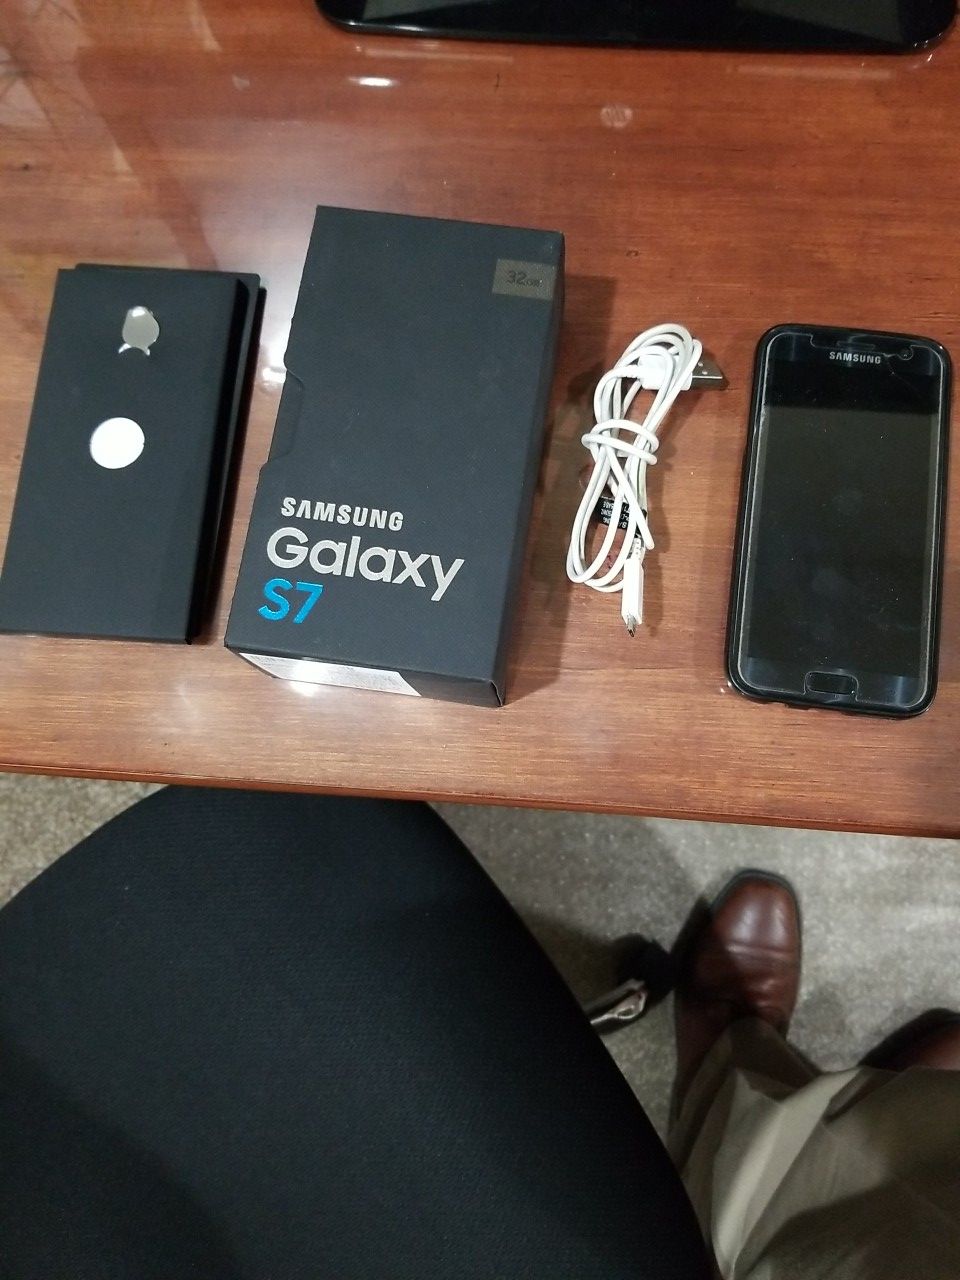 Samsung 7 Verizon (unlocked). Includes hard case, fast charger, and original box.